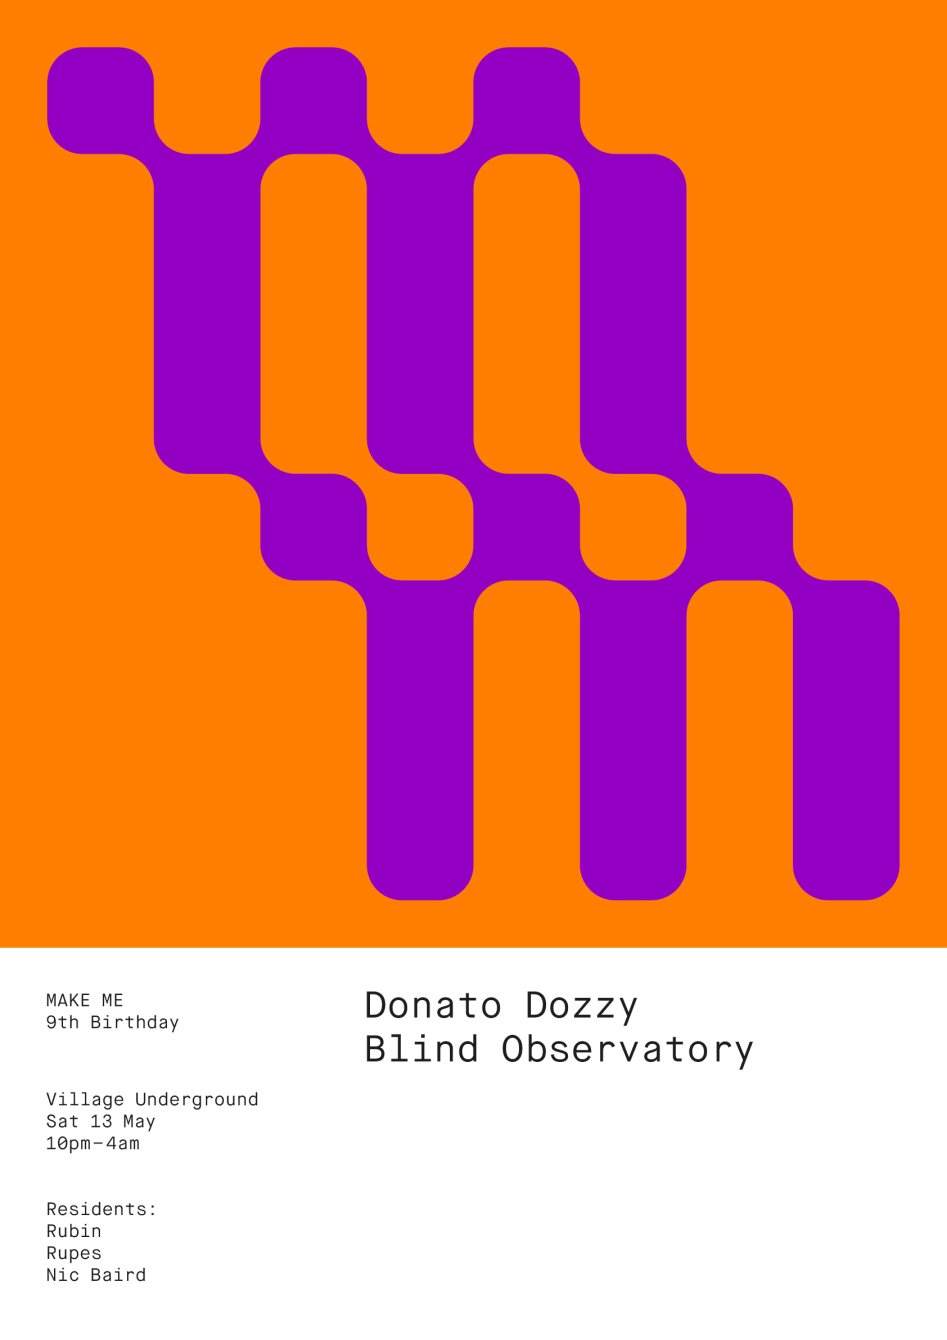 Make Me 9th Birthday with Donato Dozzy and Blind Observatory - フライヤー表